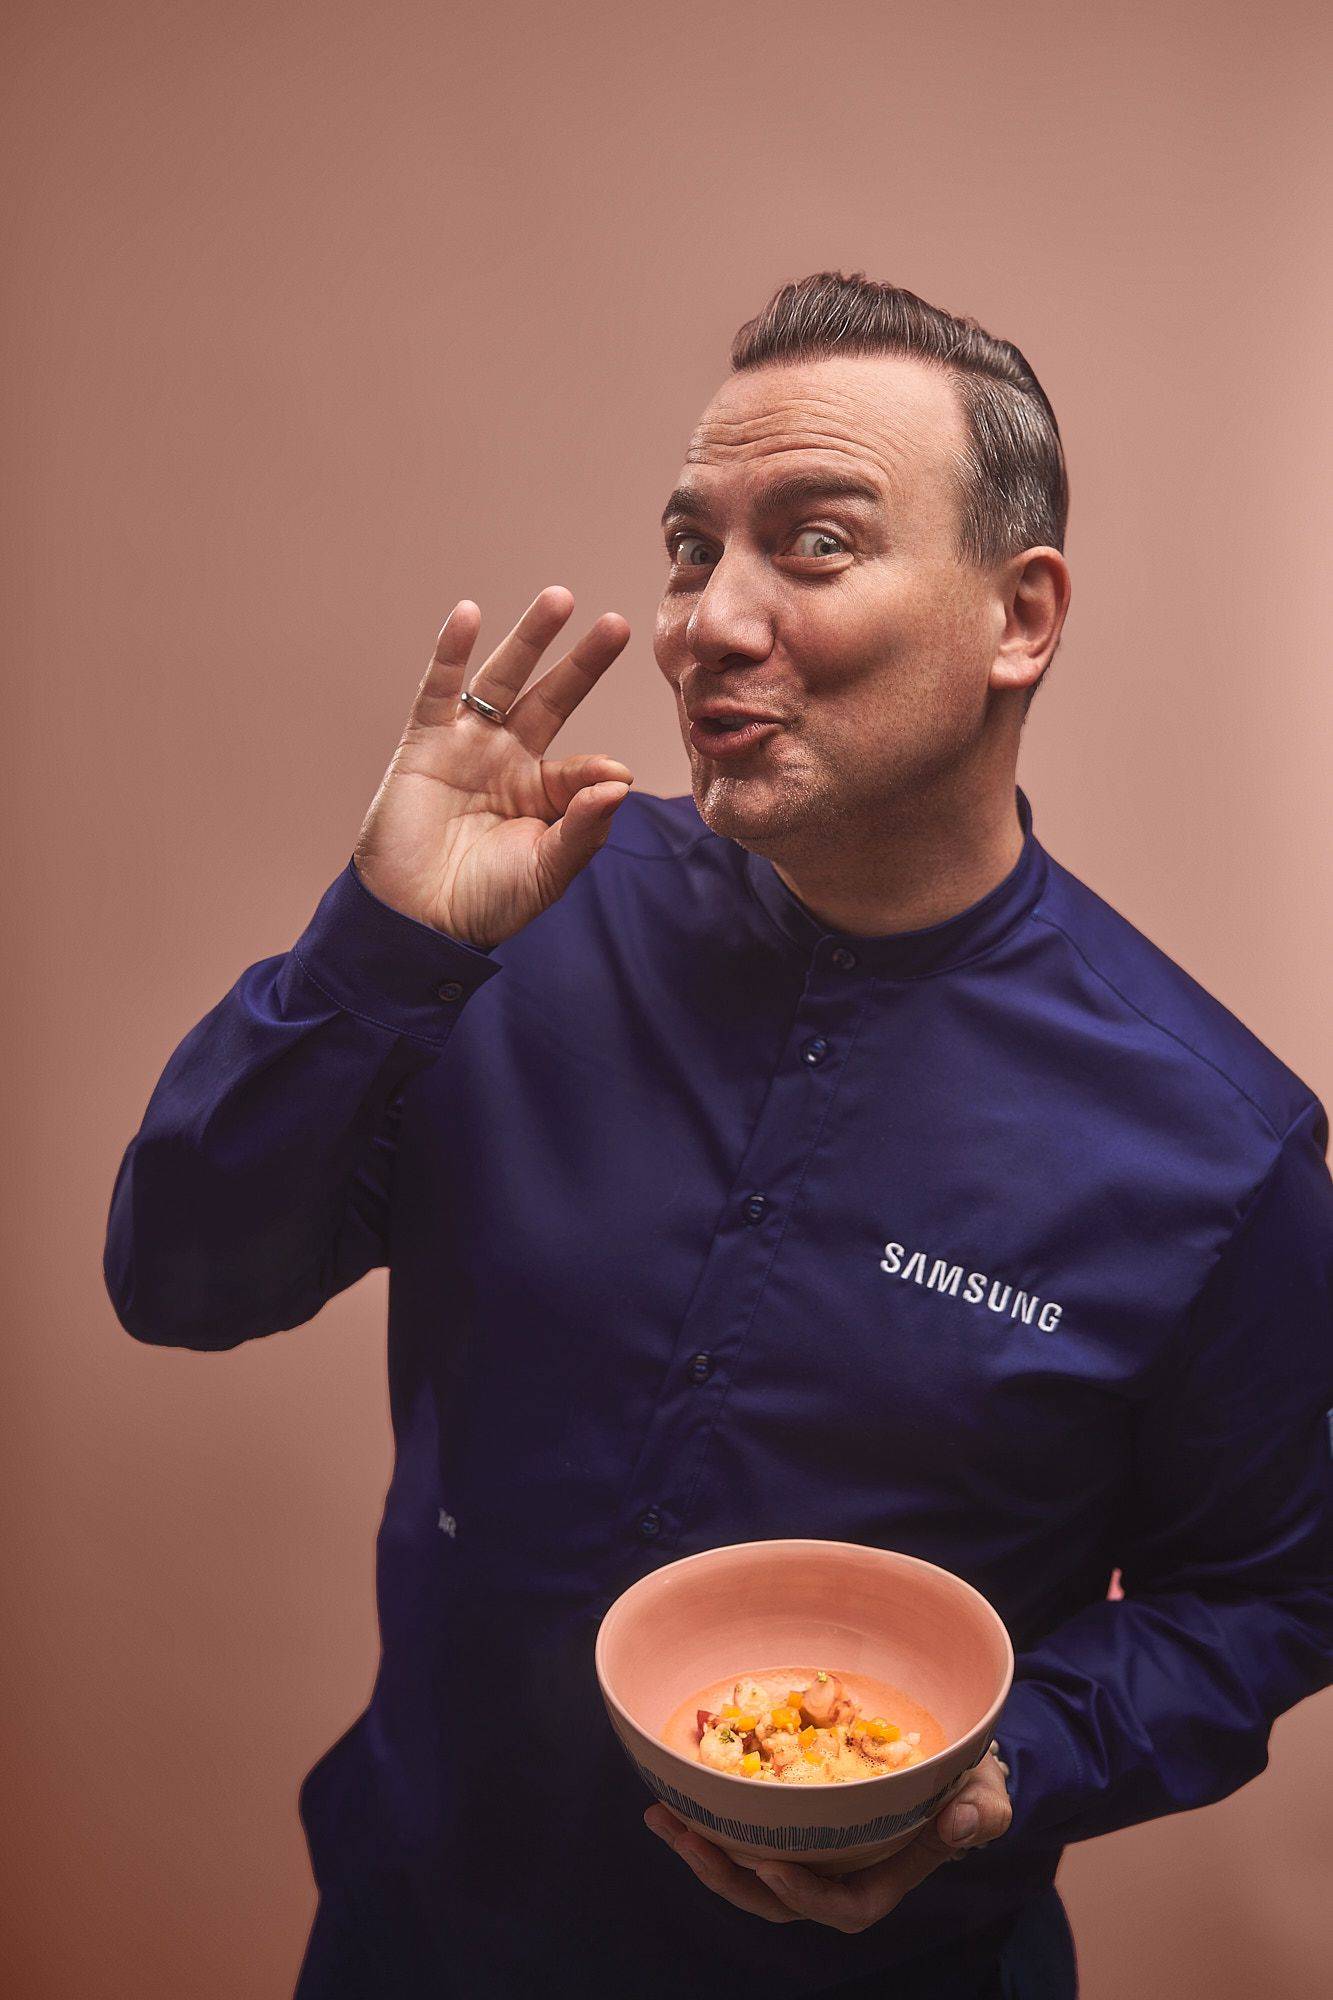 portrait photography for samsung with celebrity chef tim raue